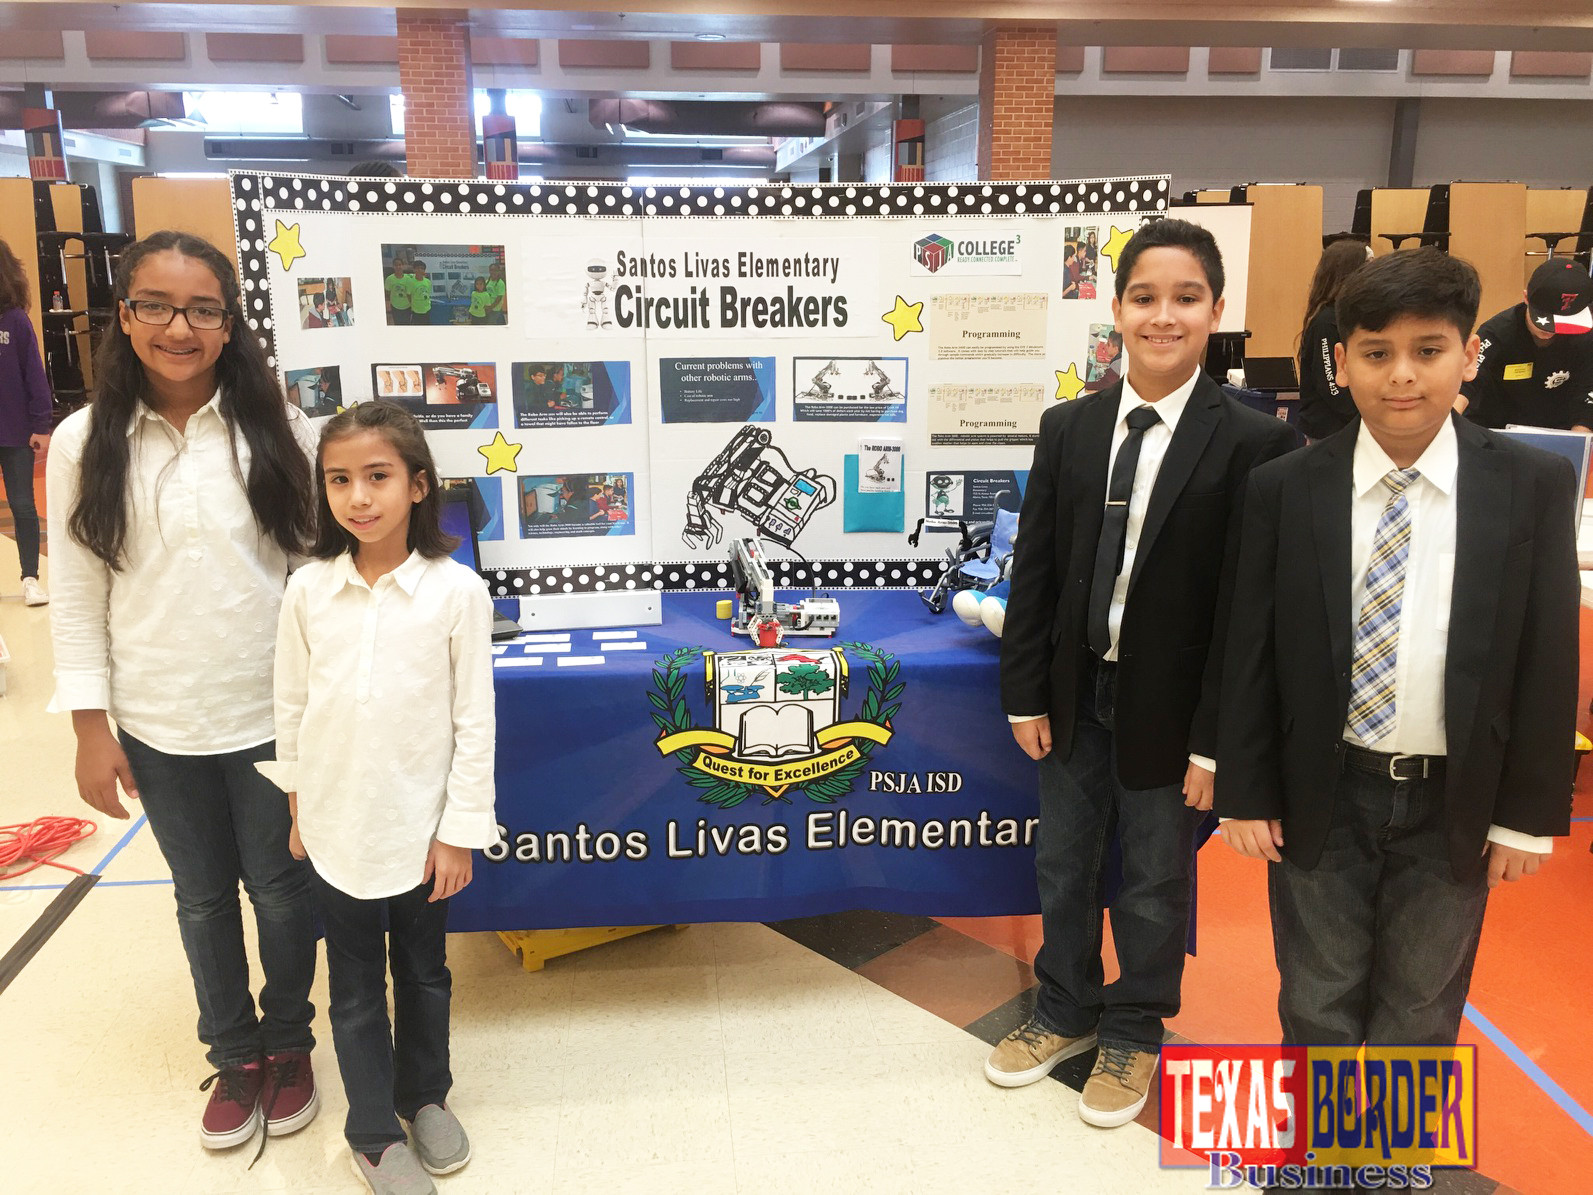  The Santos Livas Elementary Robotics team in Pharr-San Juan-Alamo ISD (PSJA) was the only elementary team to recently qualify and compete at the Texas Computer Education Association (TCEA) State Robotics Contest in Hutto, Texas. The team members included:  Mark Delos Santos, Selena Trevino, Mariana Camacho and Eathan Cruz along with their sponsor, Rene Treviño.